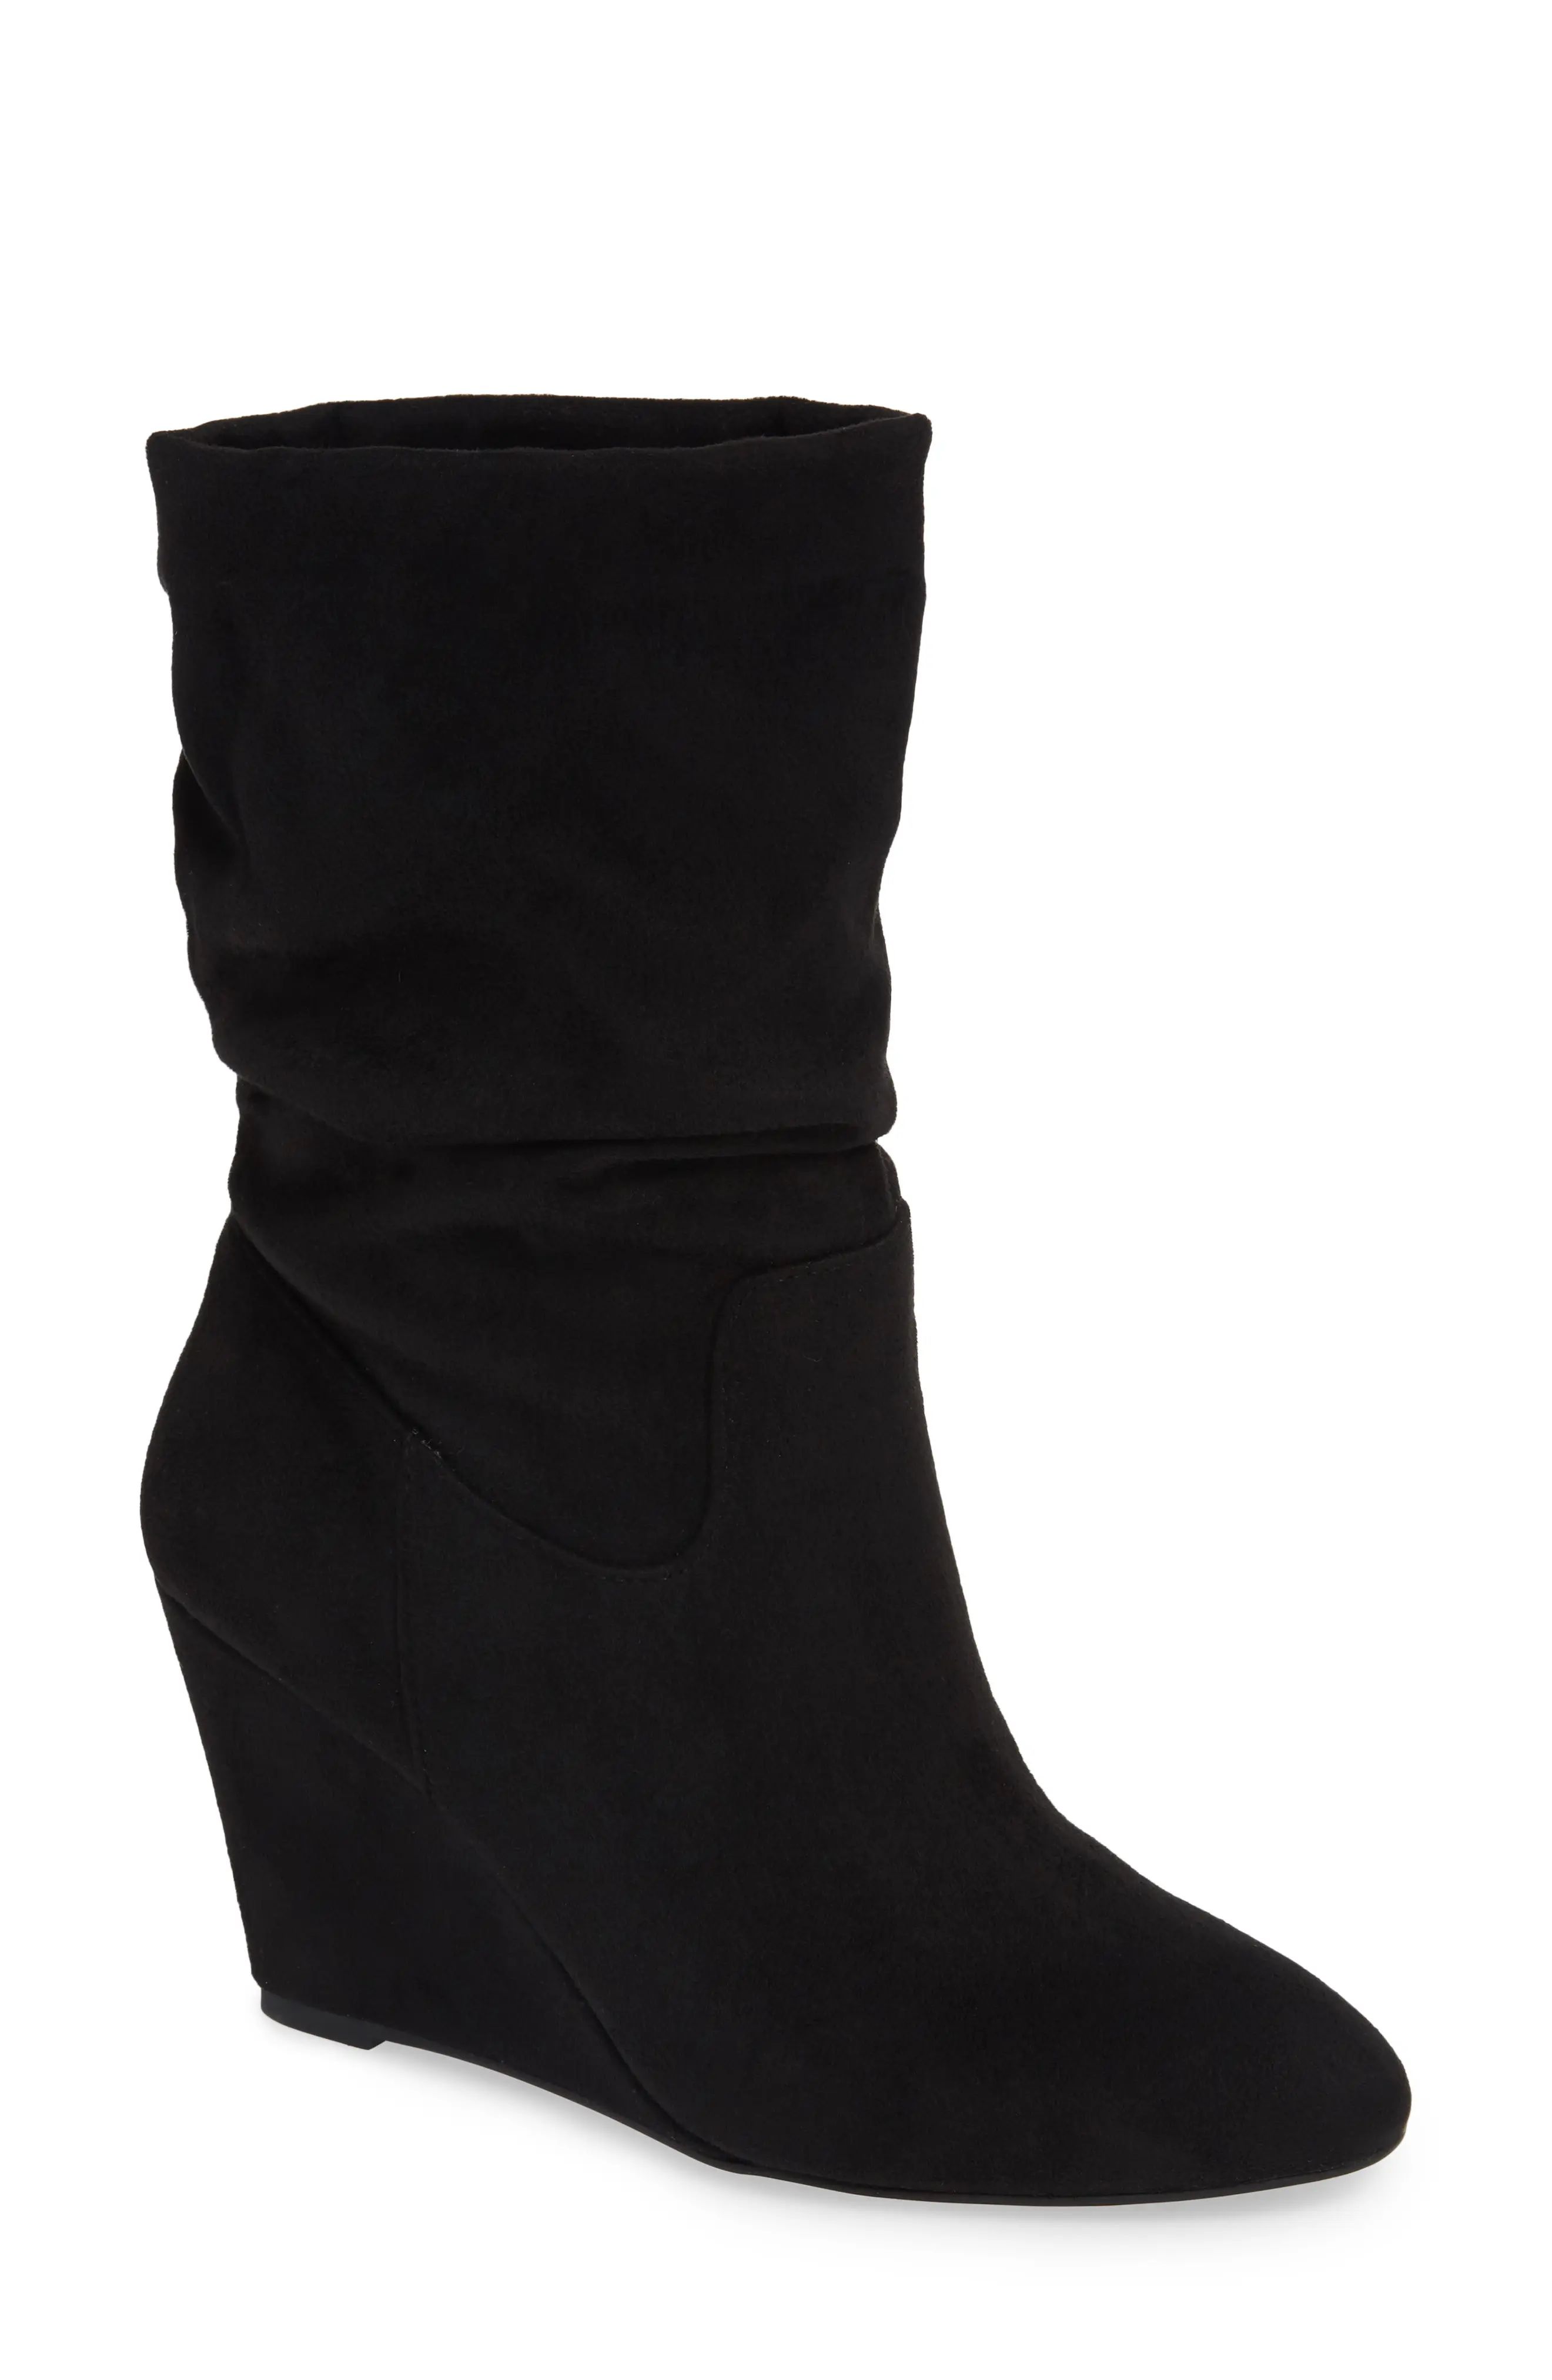 Women's Athena Alexander Slouch Wedge Bootie, Size 5 M - Black | Nordstrom